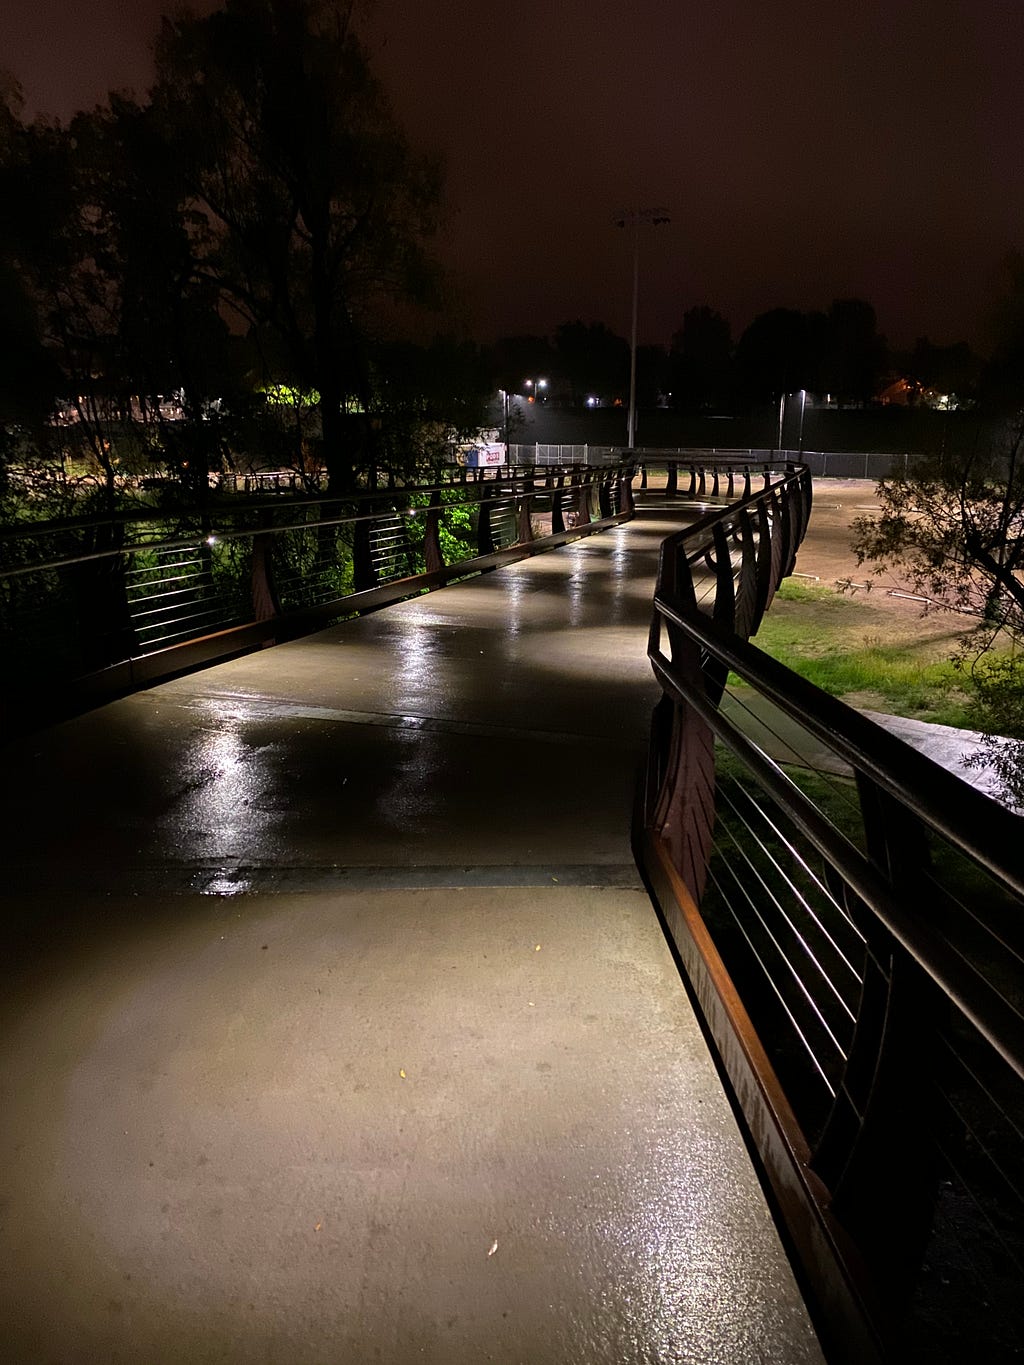 iPhone 11 Pro Night mode photo of a wet brigde at night